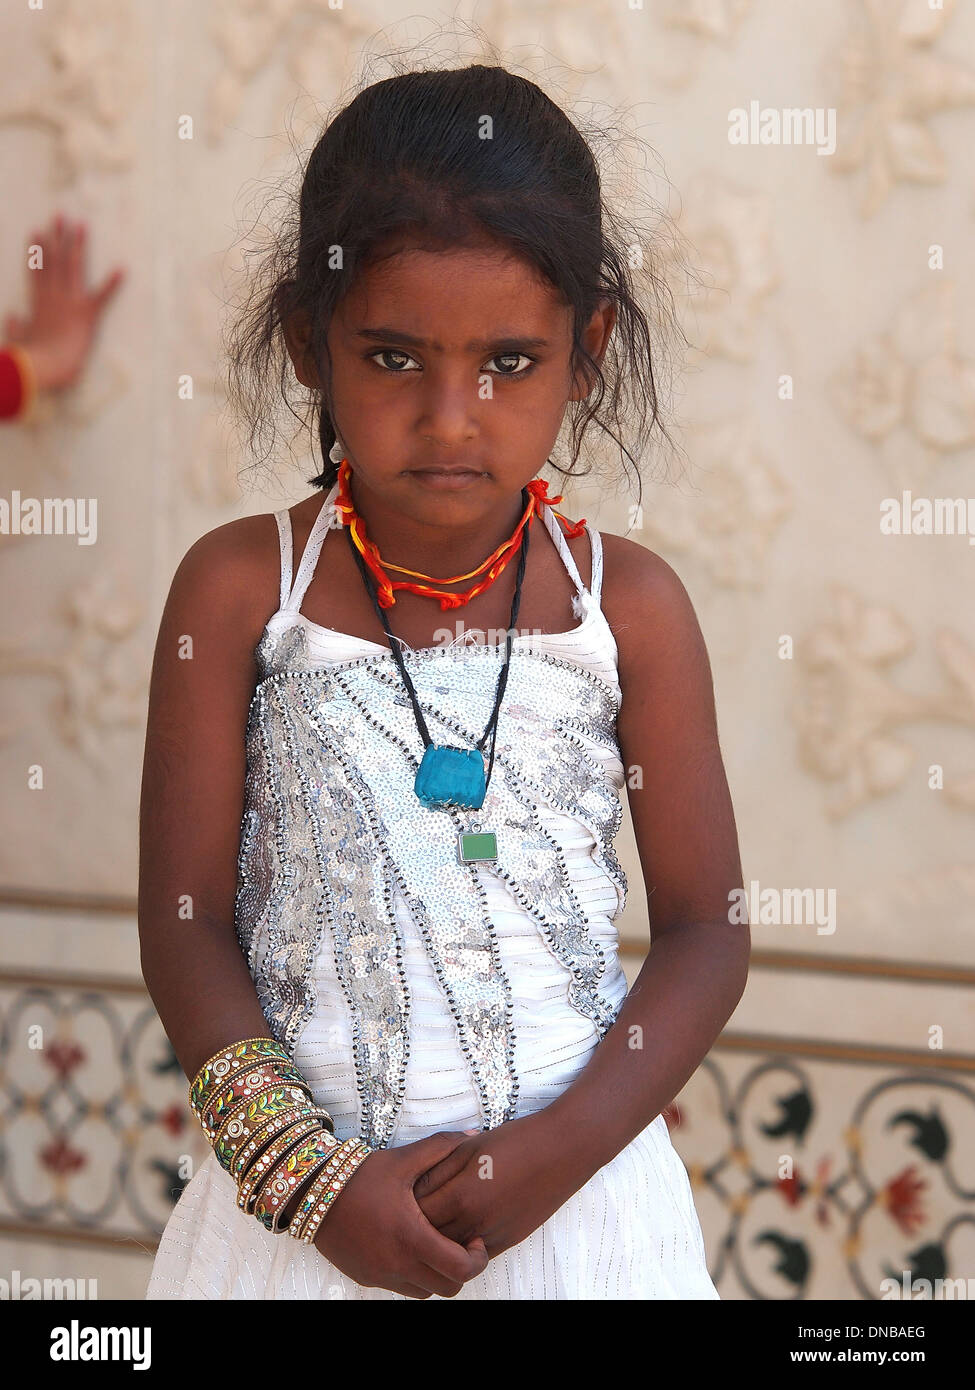 young Nepali girl in white dress Stock Photo